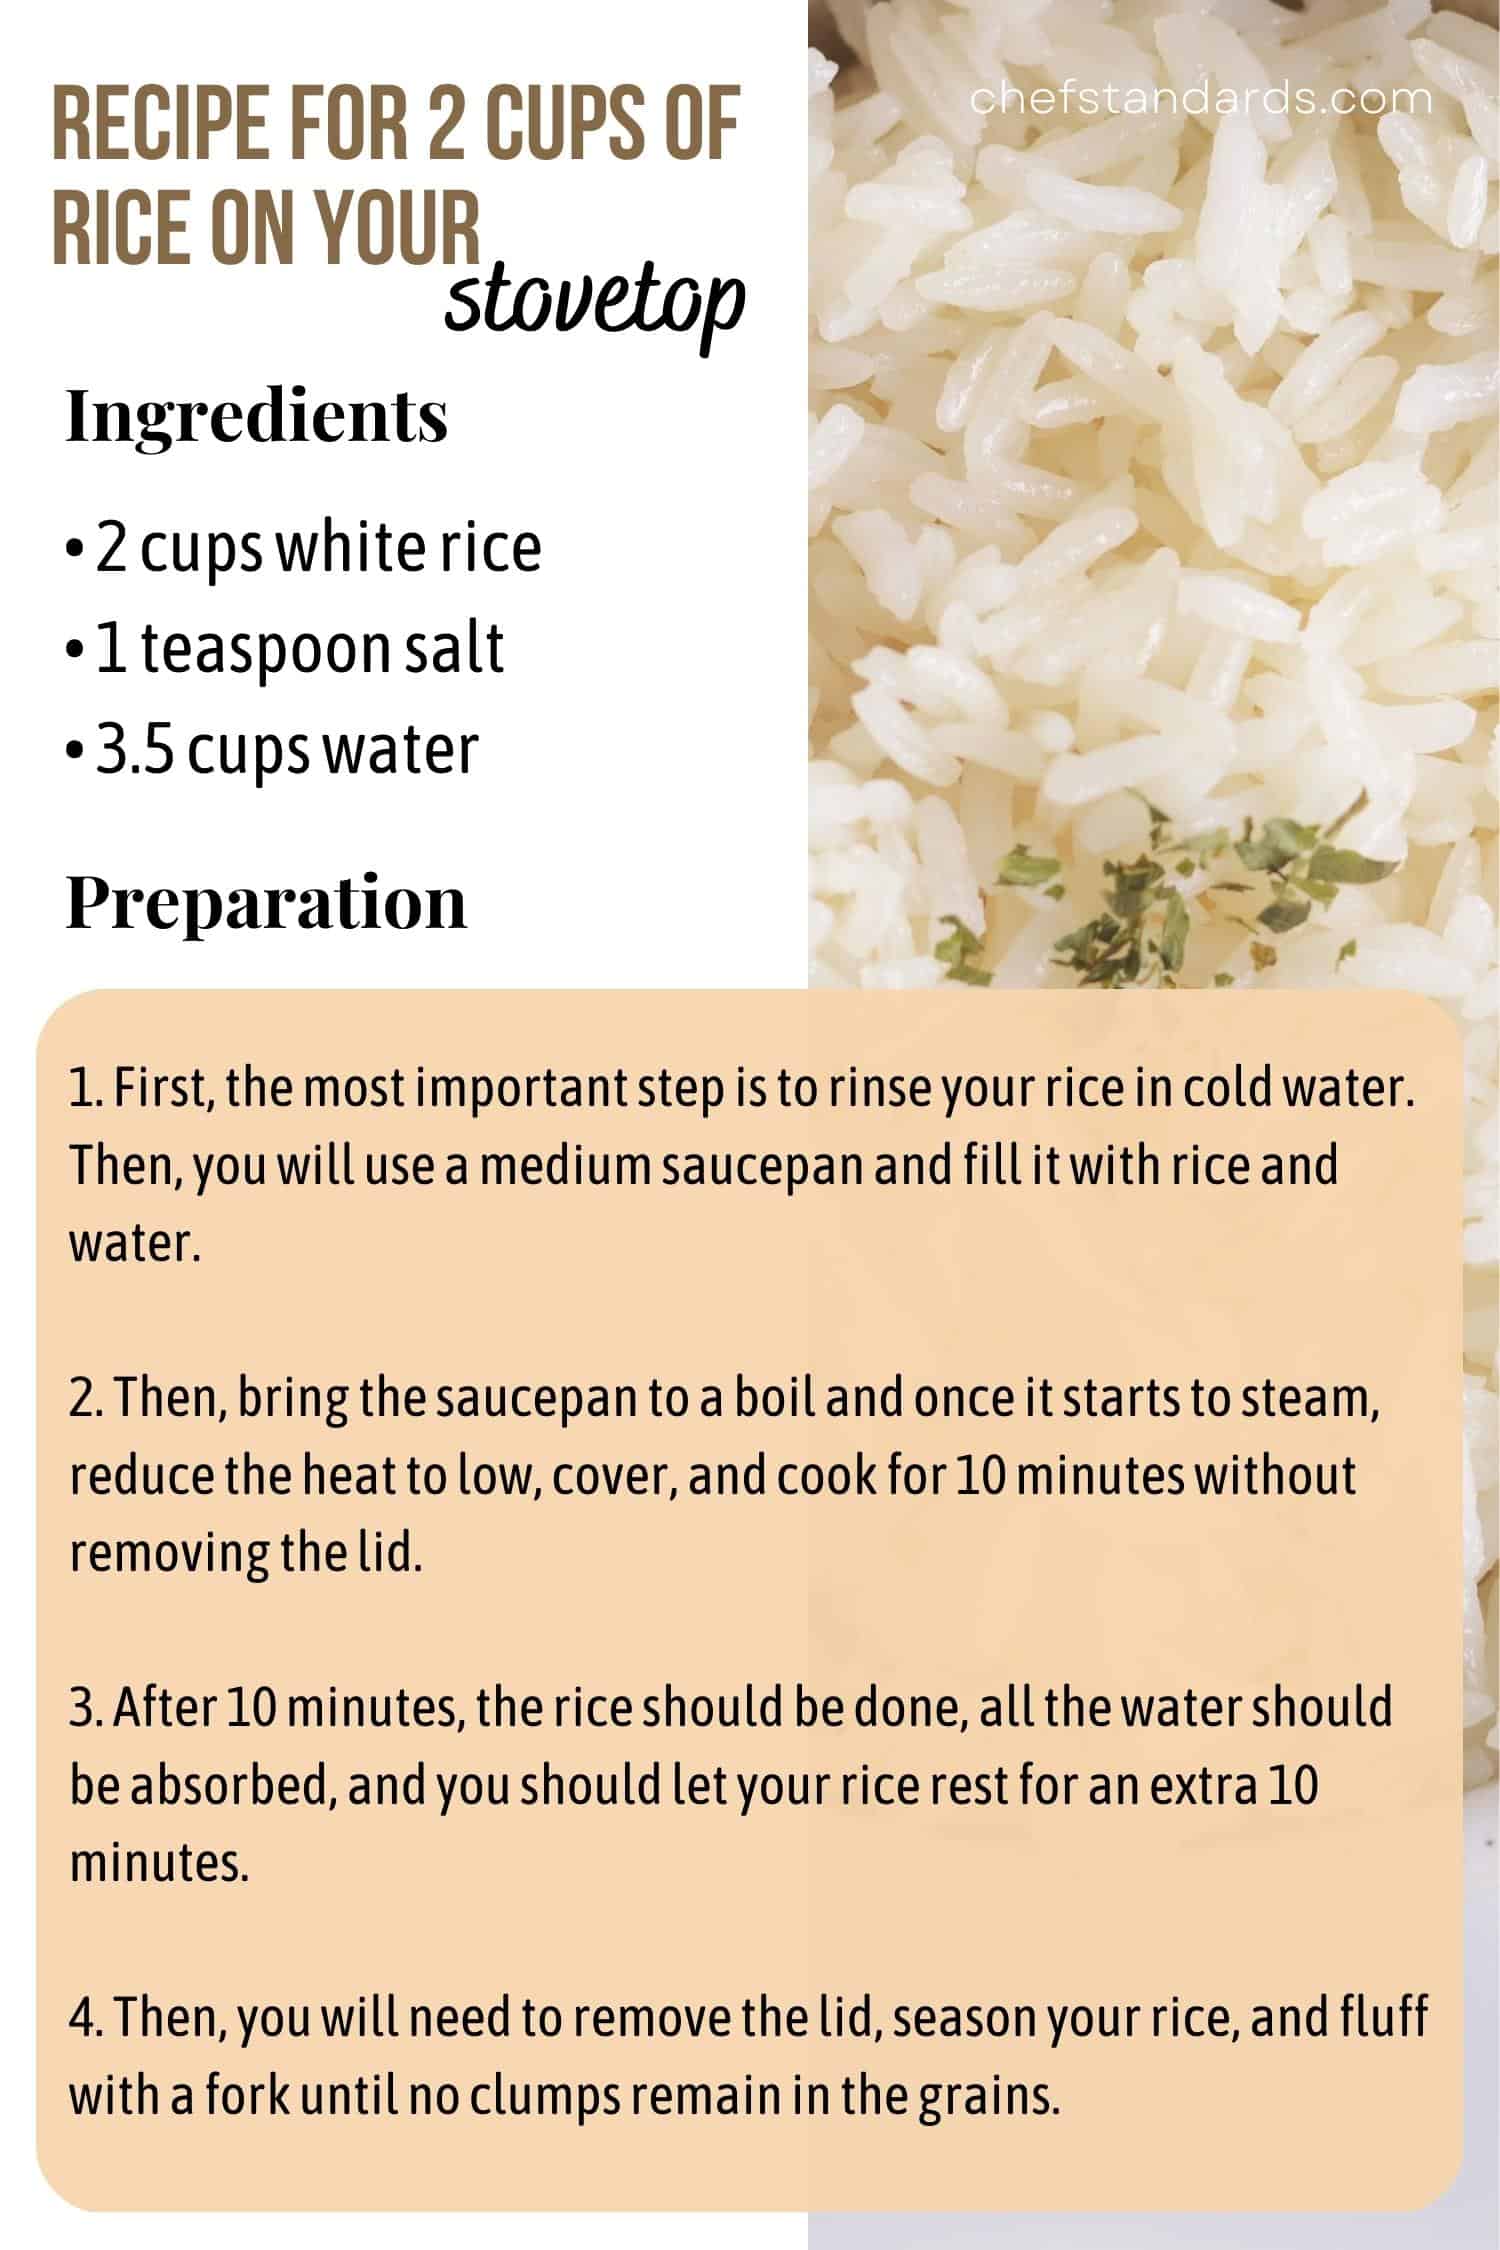 Recipe For 2 Cups Of Rice On Your stovetop